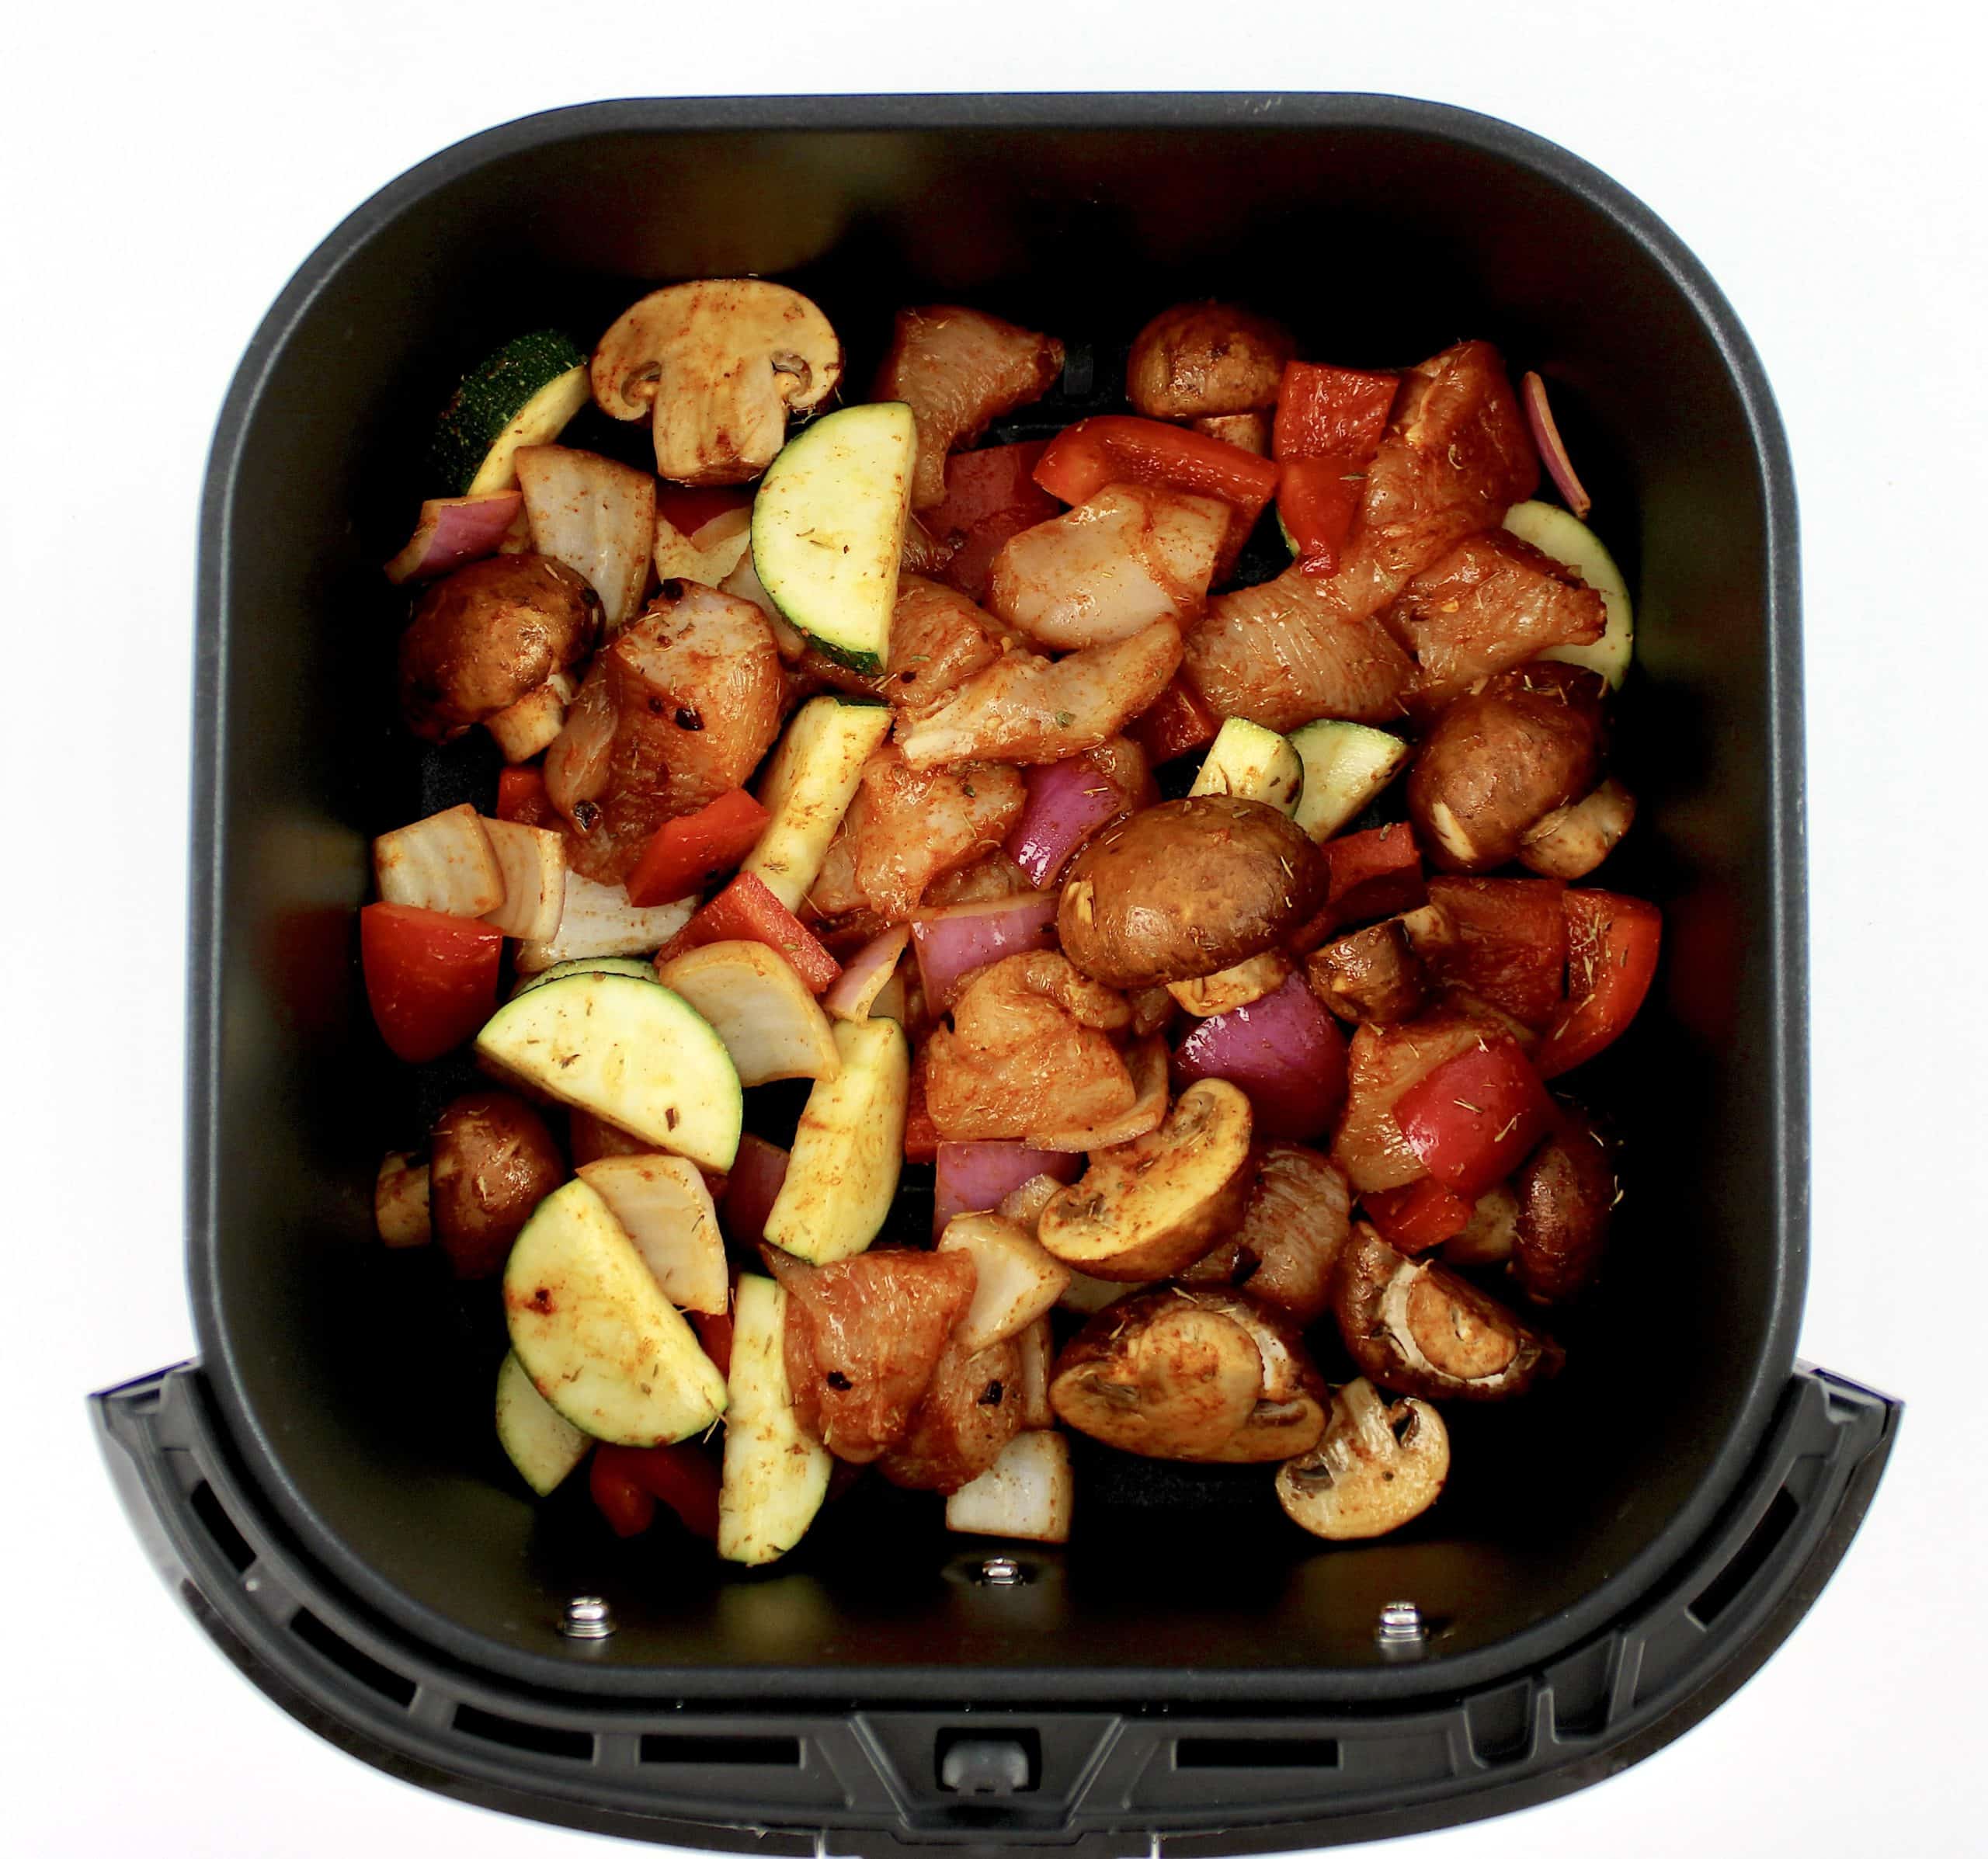 chopped chicken and veggies with spices in air fryer basket uncooked